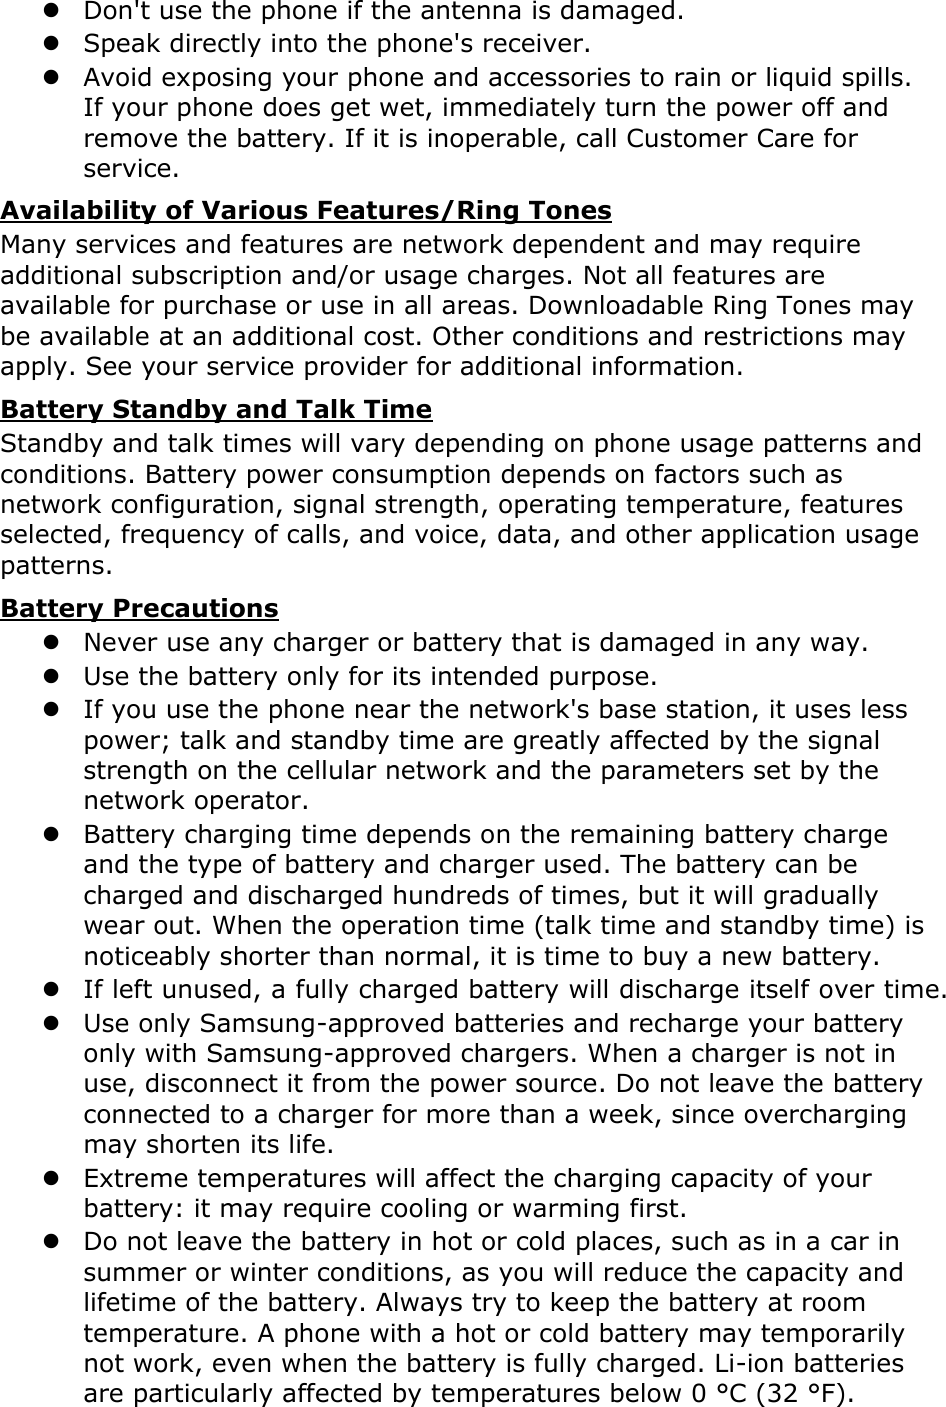 Page 19 of Samsung Electronics Co GTI9070P Cellular/PCS GSM/EDGE/WCDMA Phone with WLAN, RFID and Bluetooth User Manual